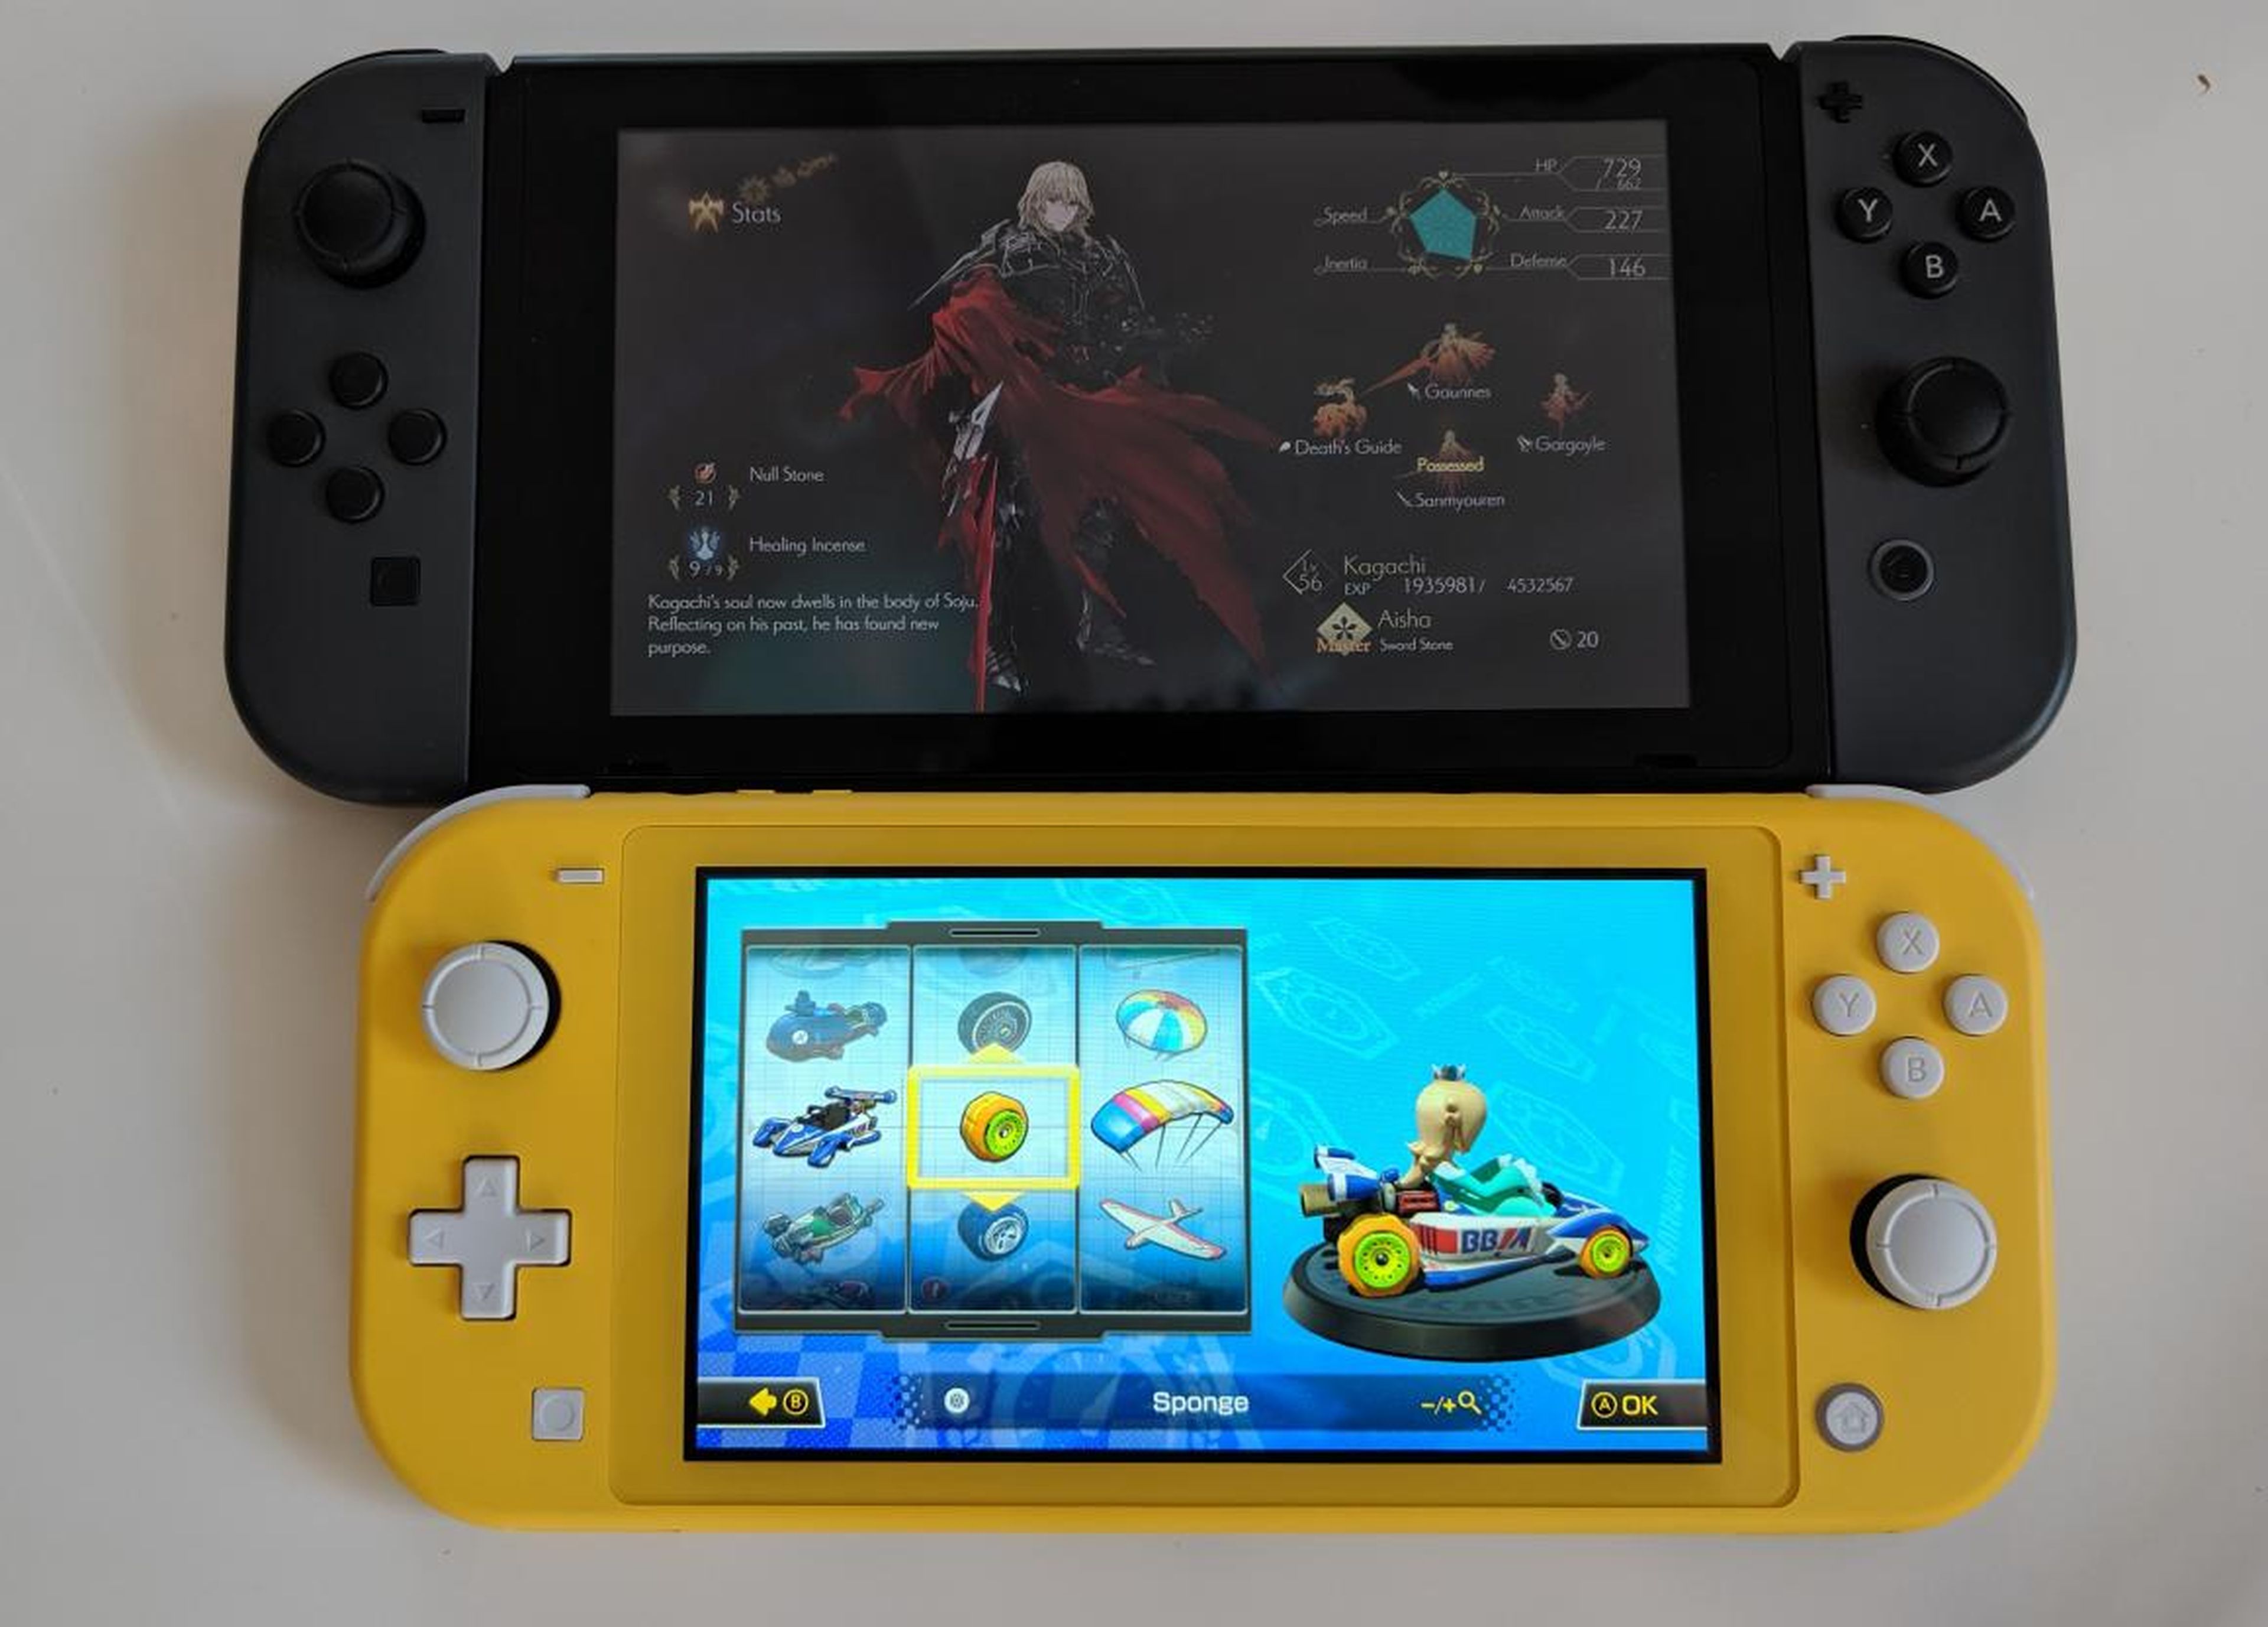 I used my own Switch for a size comparison with the Switch Lite. At first glance, the difference in screen size felt negligible.